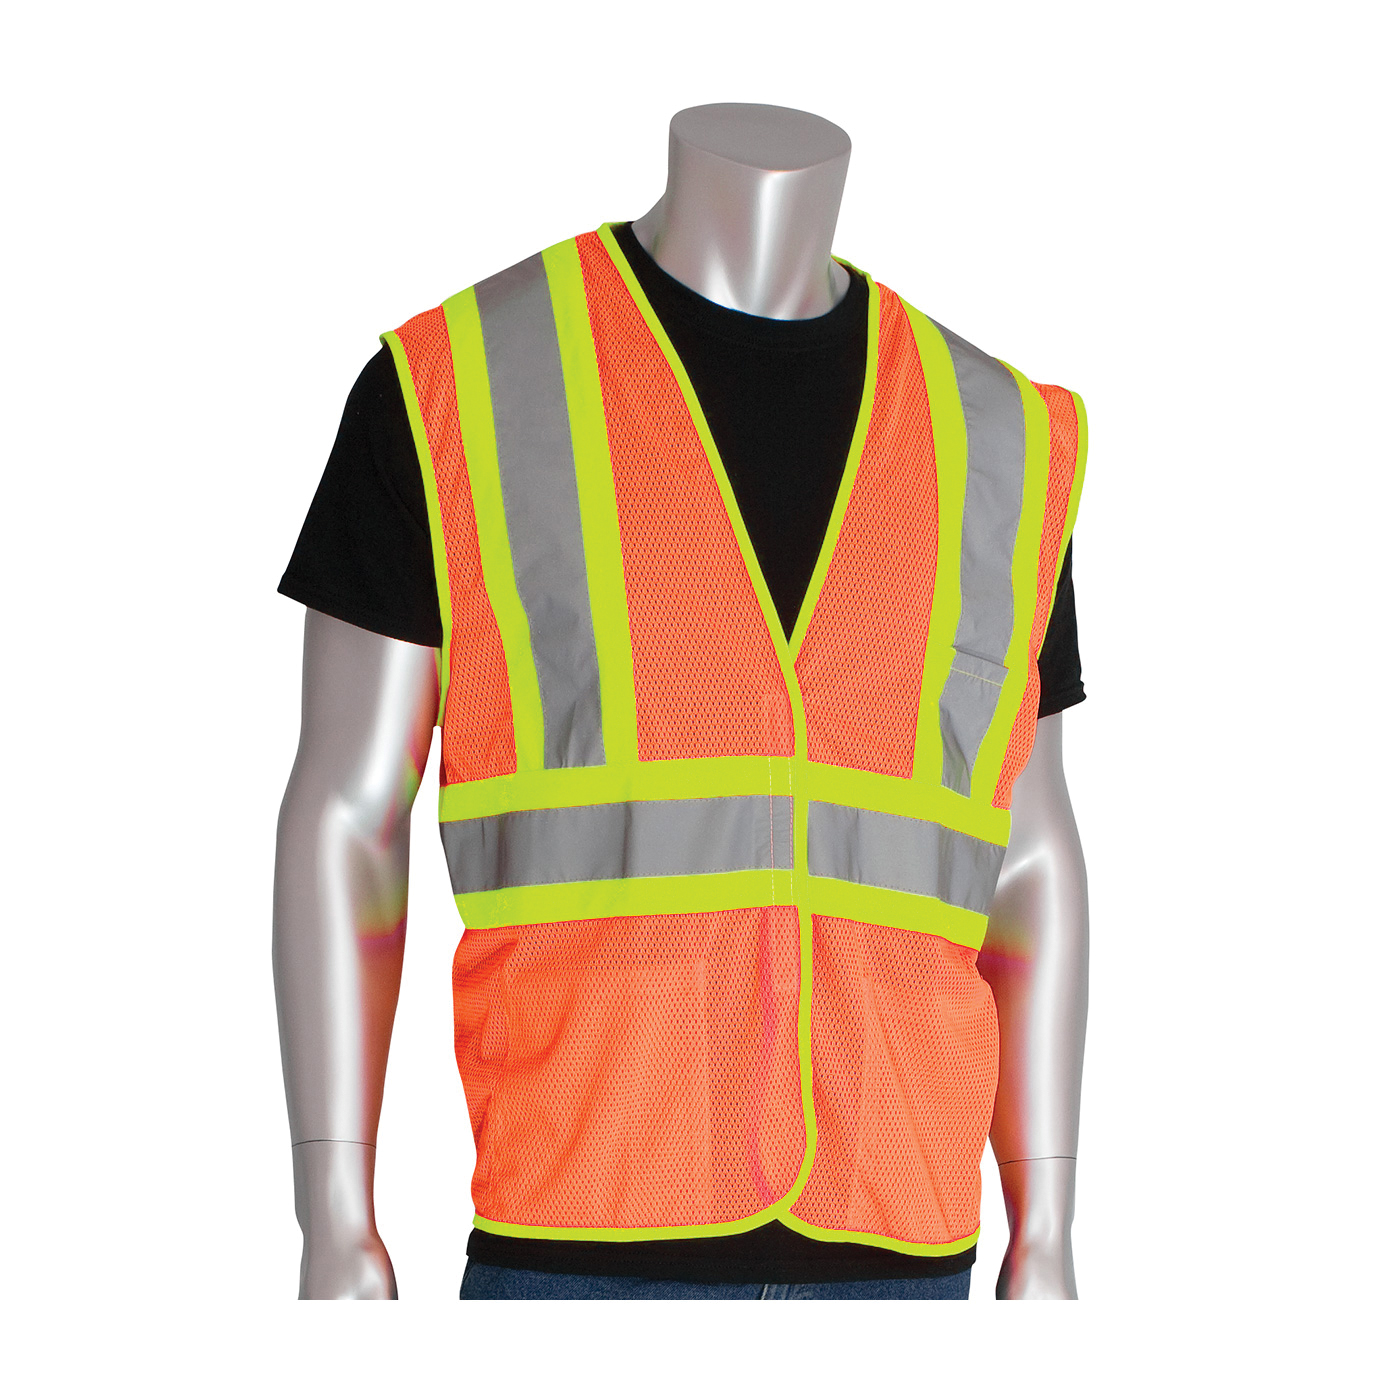 PIP® 302-MVATOR-XL 2-Tone Safety Vest, XL, Hi-Viz Orange, Polyester, Hook and Loop Closure, 3 Pockets, ANSI Class: Class 2, Specifications Met: ANSI Specified